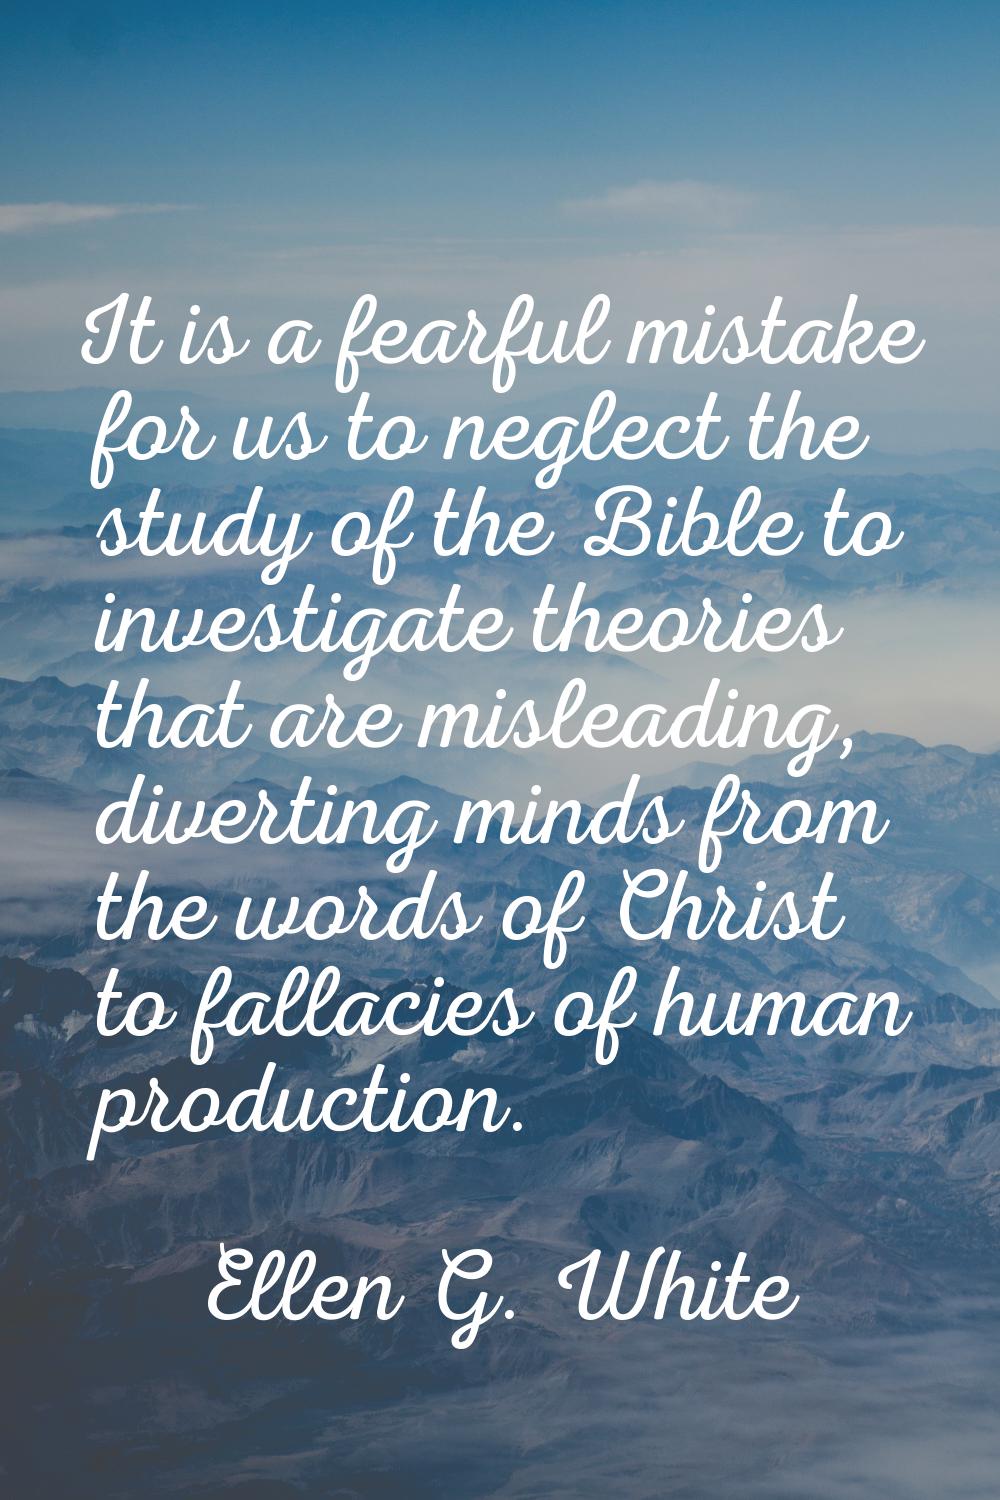 It is a fearful mistake for us to neglect the study of the Bible to investigate theories that are m